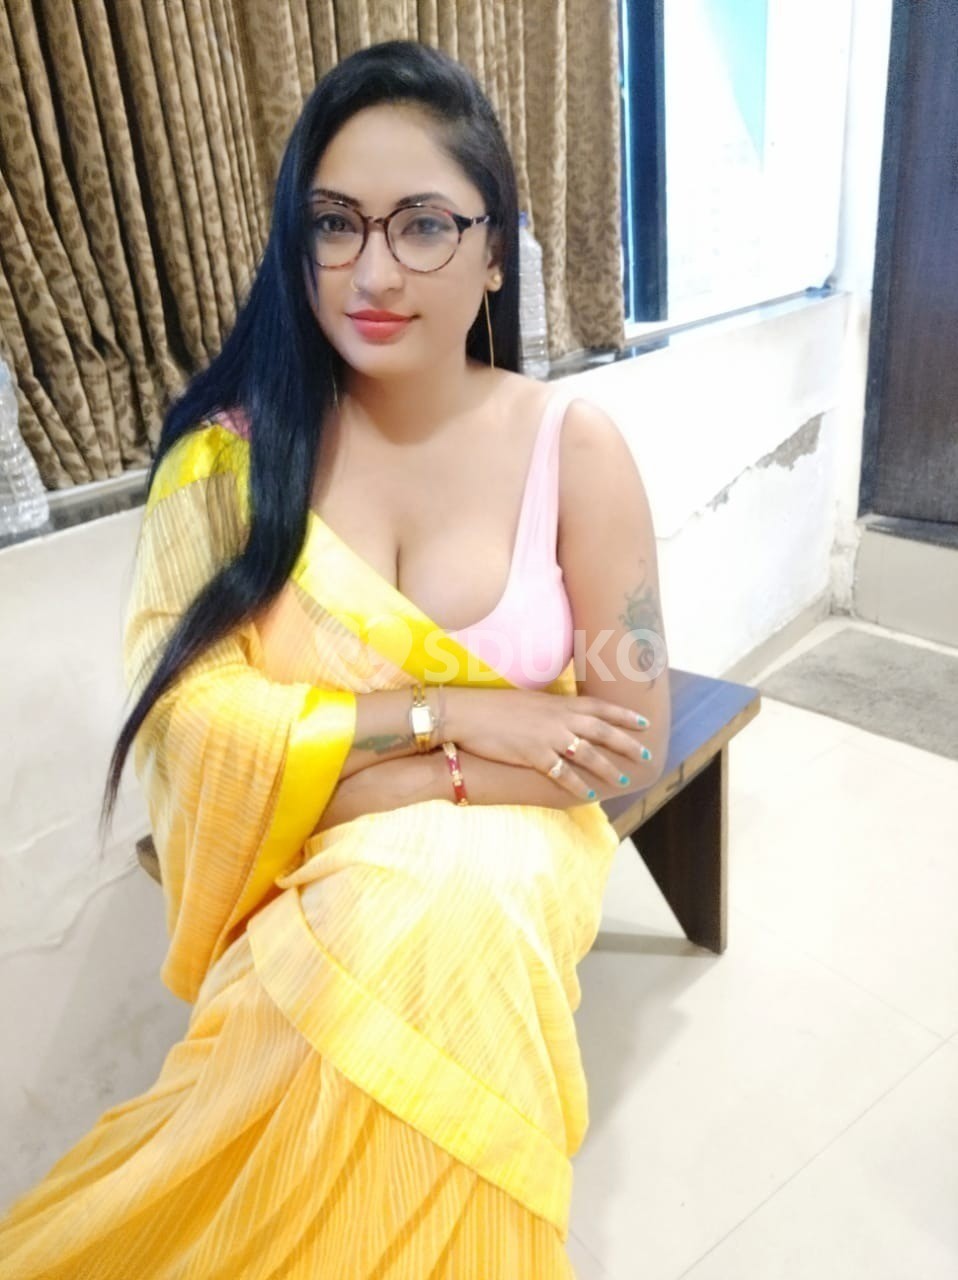 Soniya Pandey LOW PRICE🔸✅ SERVICE AVAILABLE 100% SAFE AND SECURE UNLIMITED ENJOY HOT COLLEGE GIRL HOUSEWIFE AUNTIE